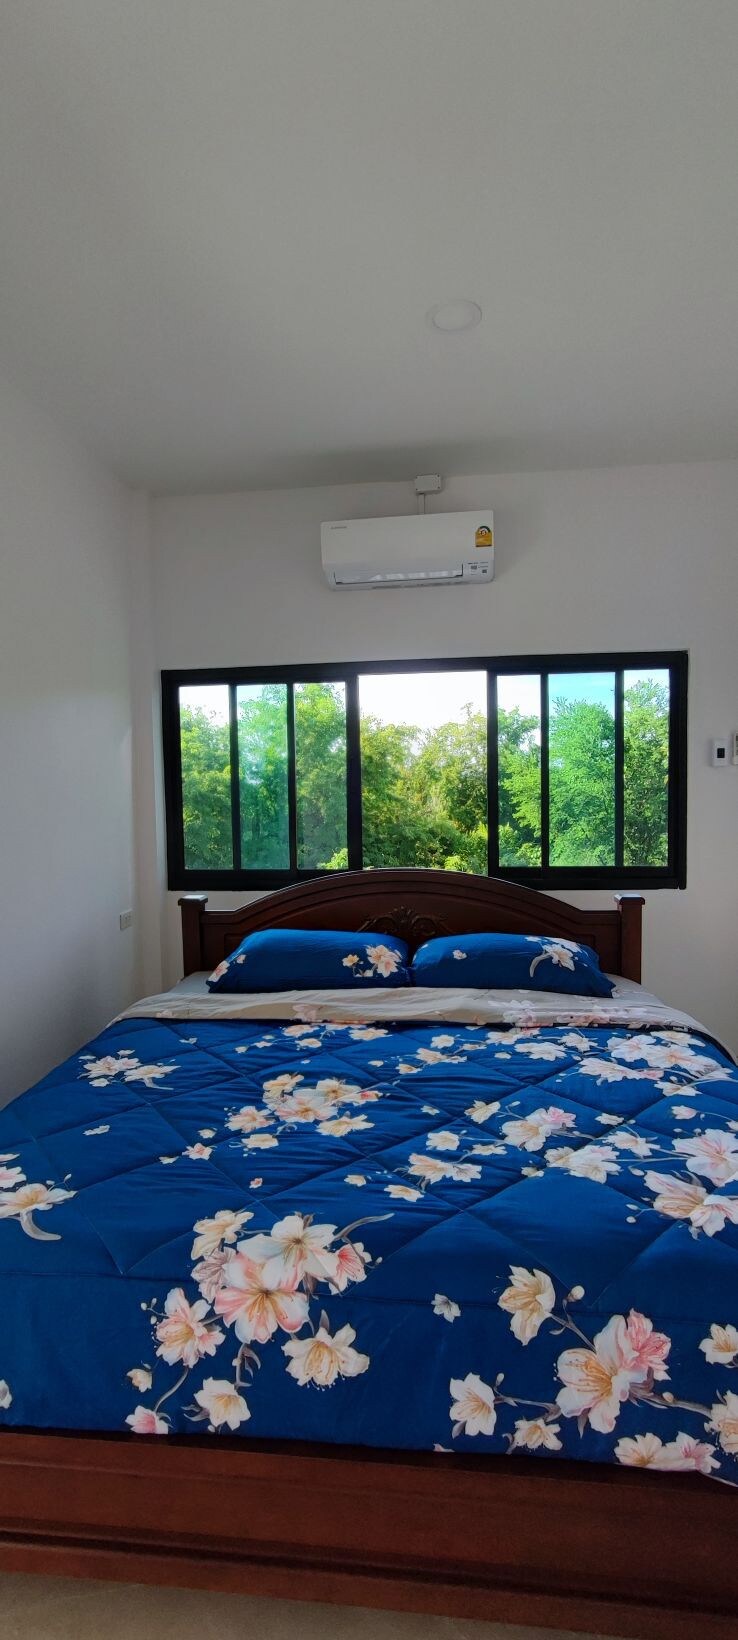 Room and Breakfast in New house near Ayutthaya